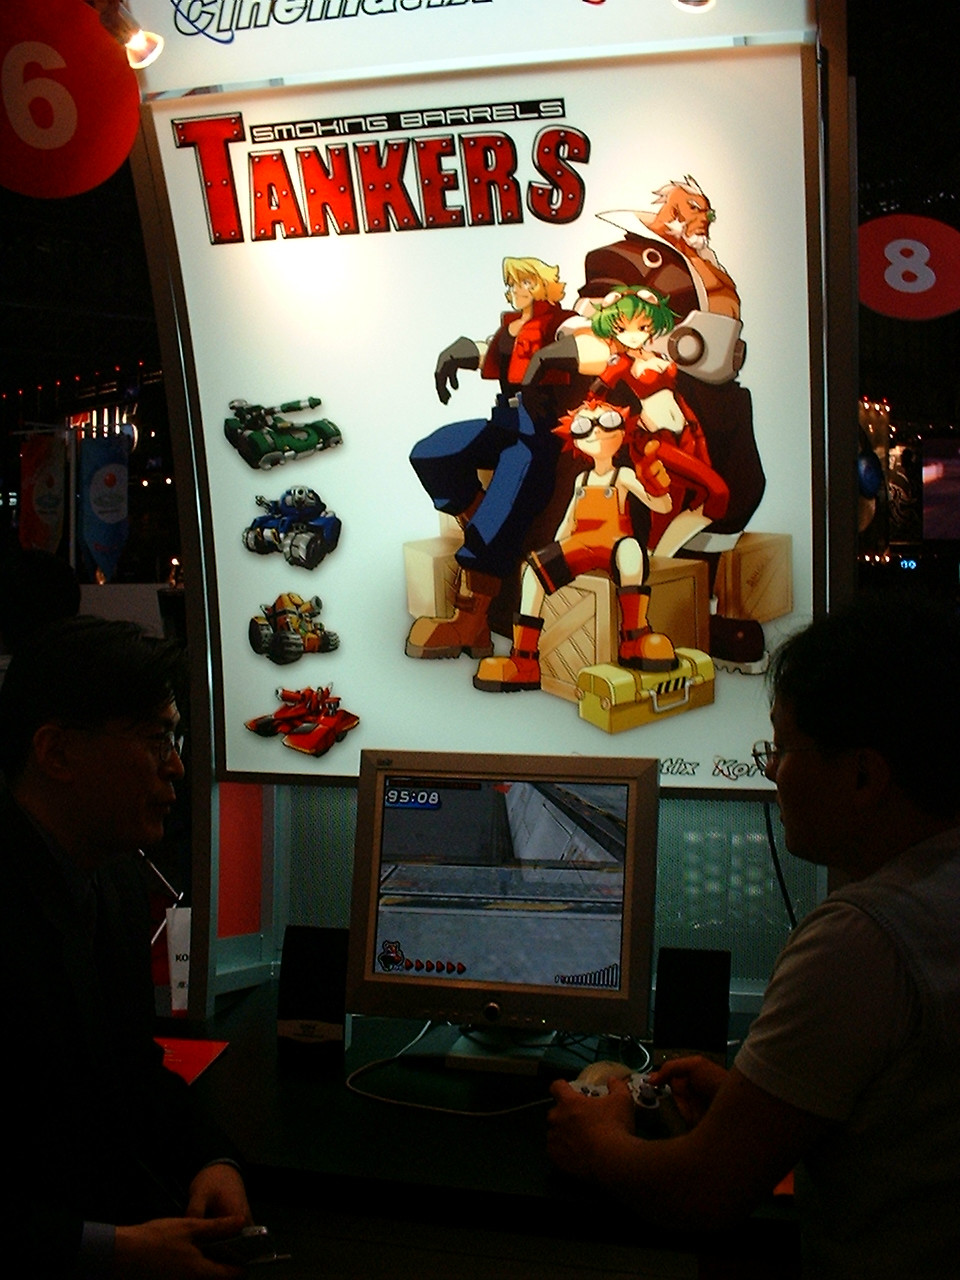 a japanese man plays a game near a poster for tankers showing some characters